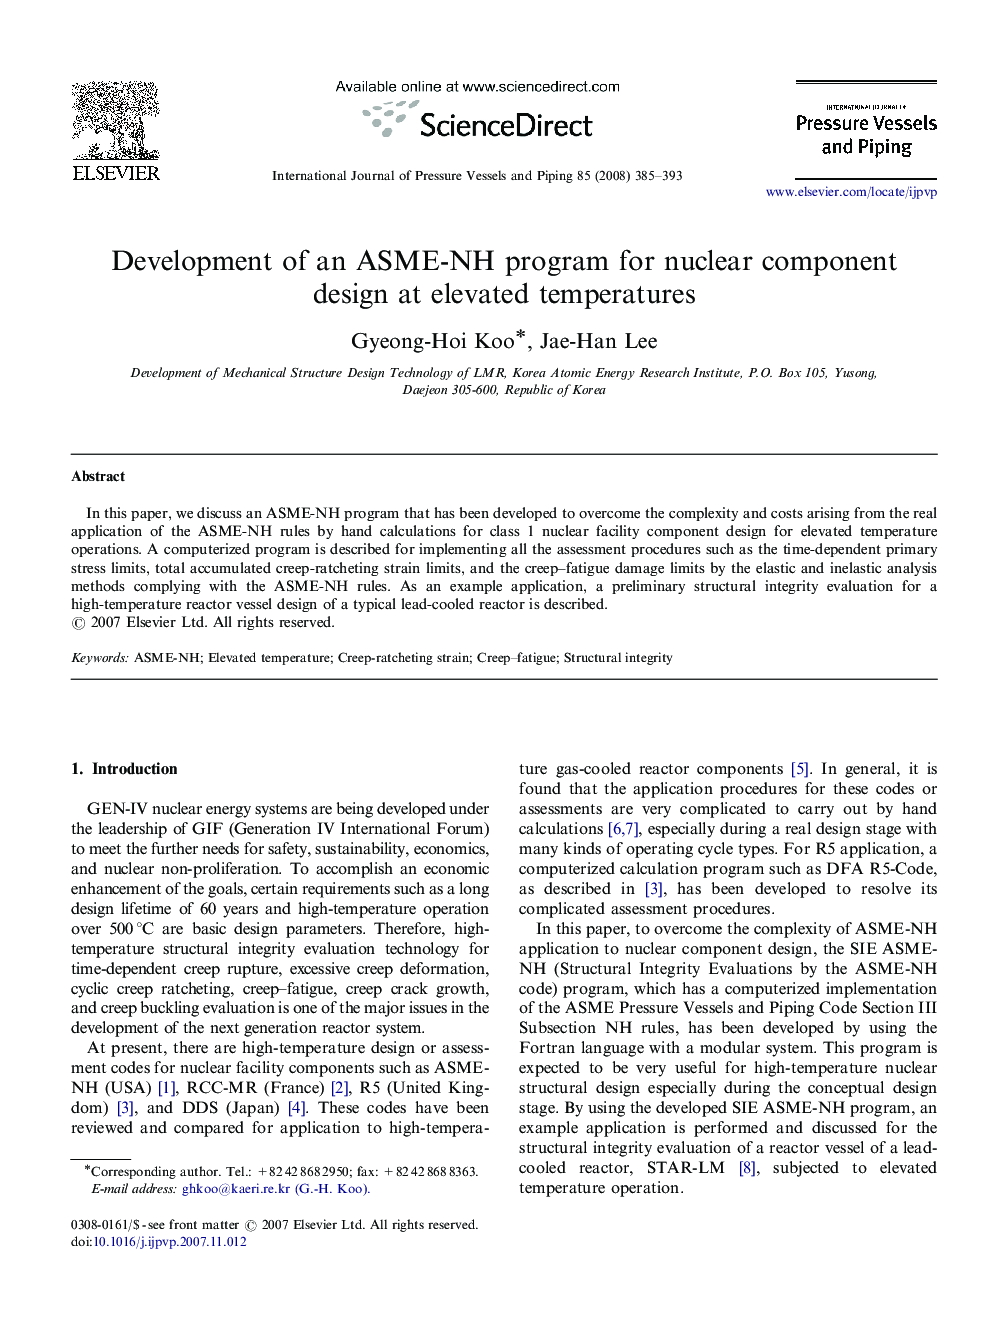 Development of an ASME-NH program for nuclear component design at elevated temperatures